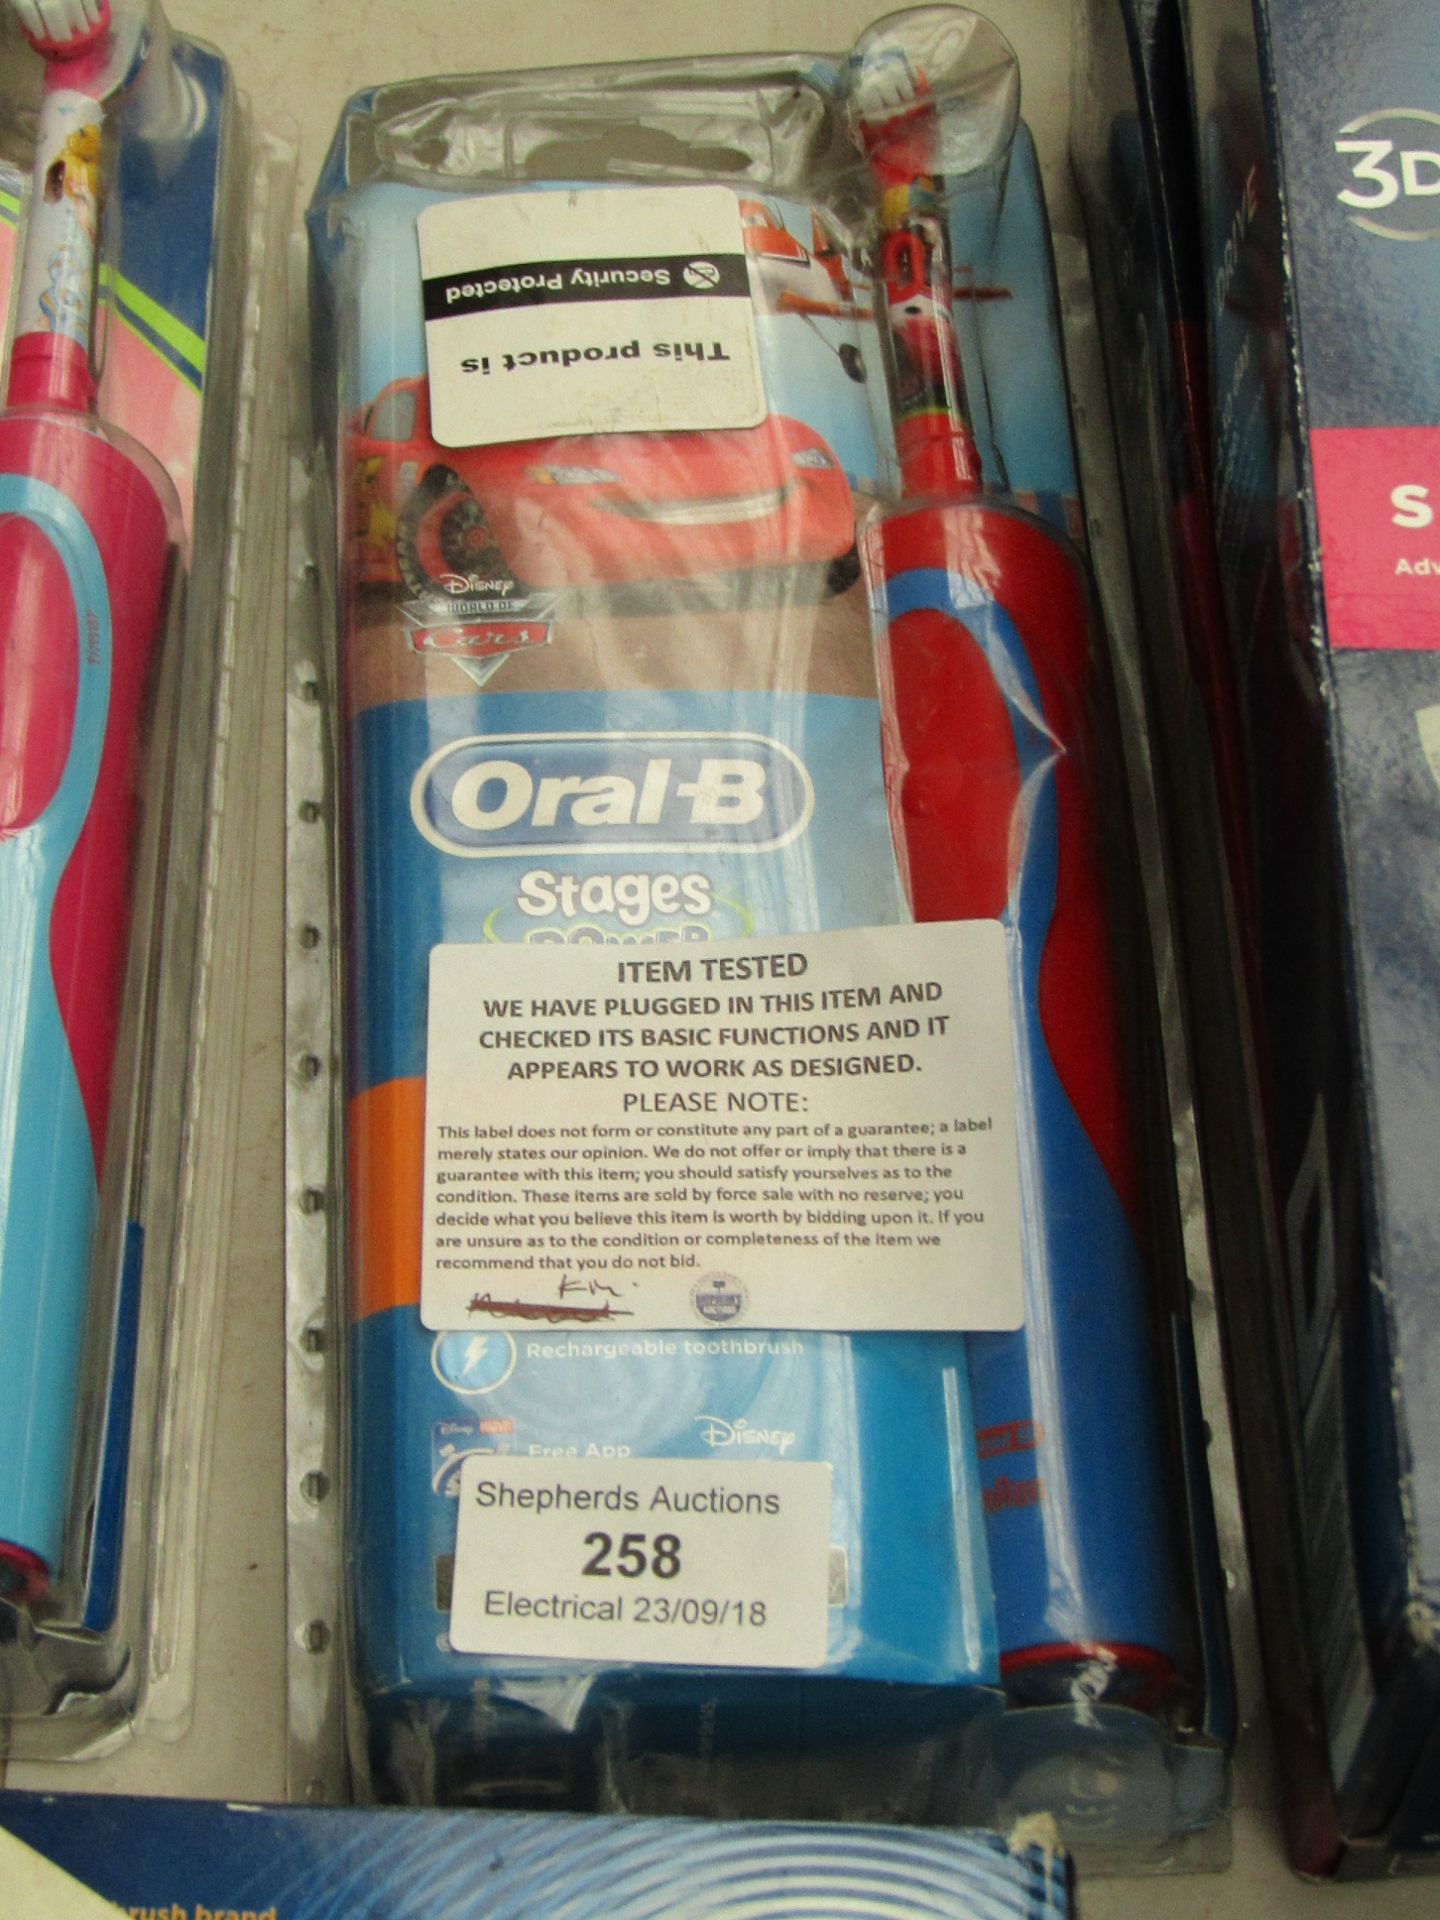 Oral-B Stages Power electric toothbrush, tested working. Includes charger (if required) and box.